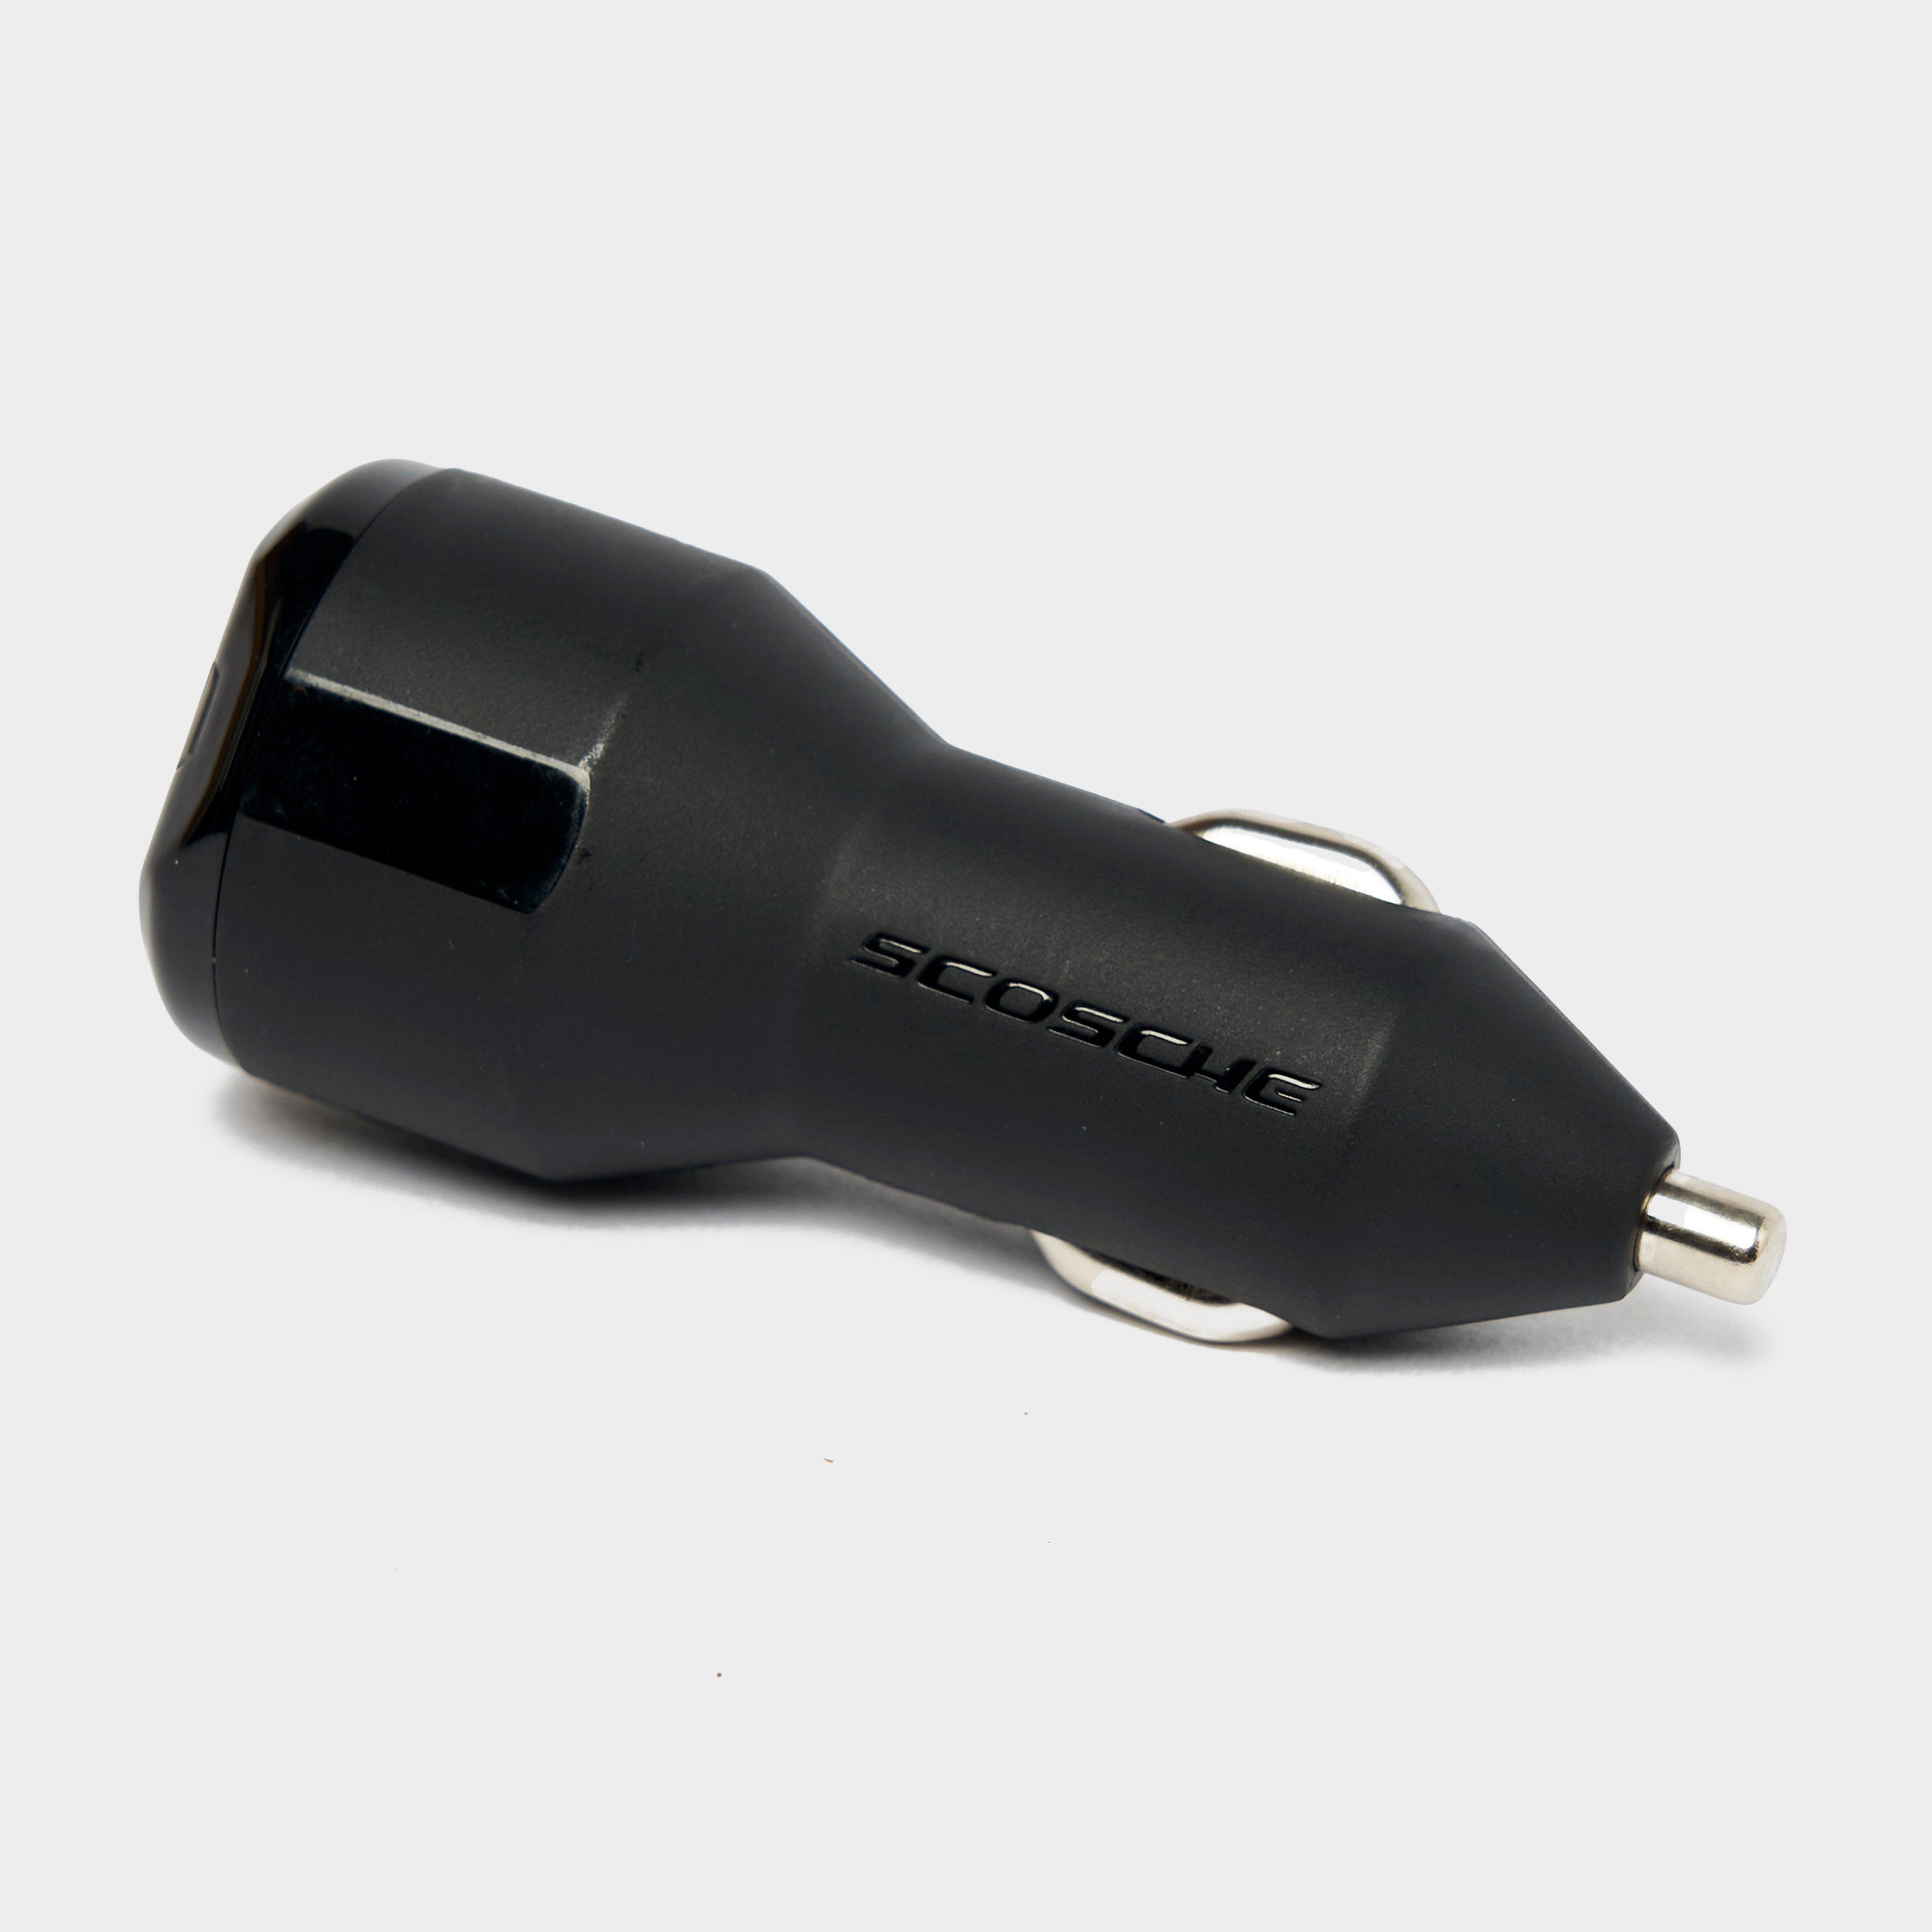 Image of Scosche 30W Combo Car Charger - Black/Charg, Black/CHARG